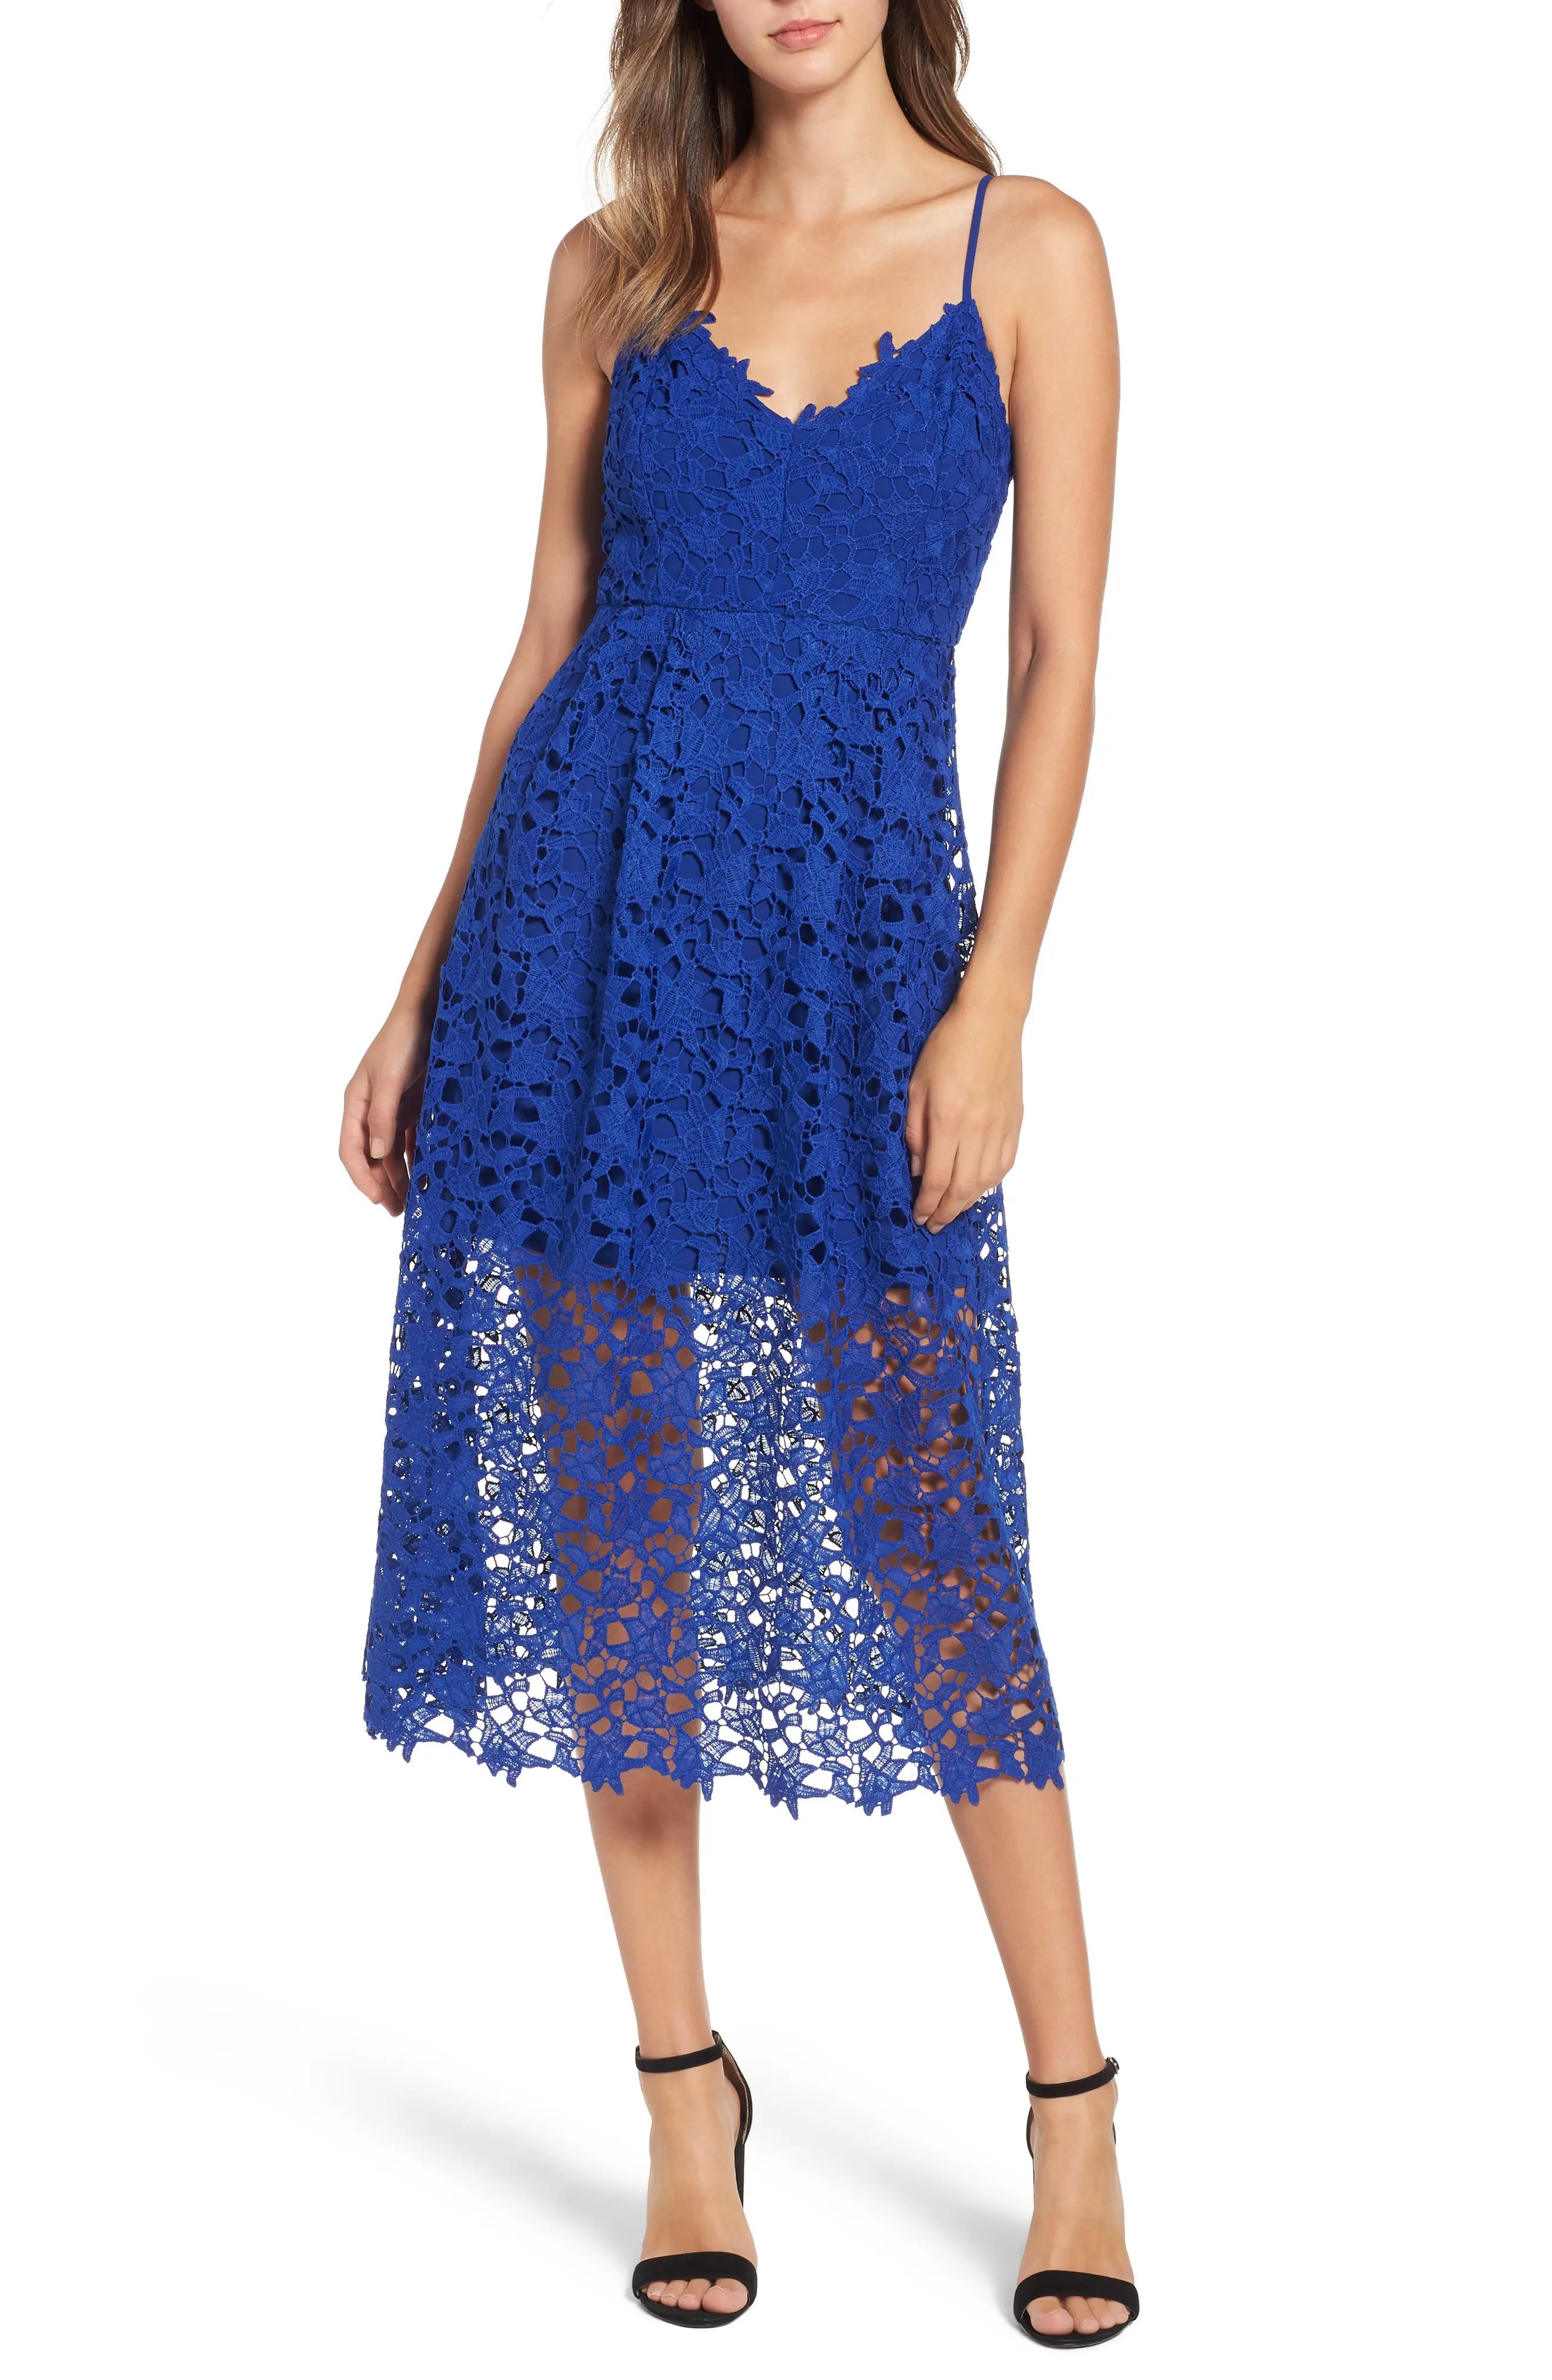 Women's Astr The Label Lace Midi Dress, Size X-Small - Blue | Nordstrom